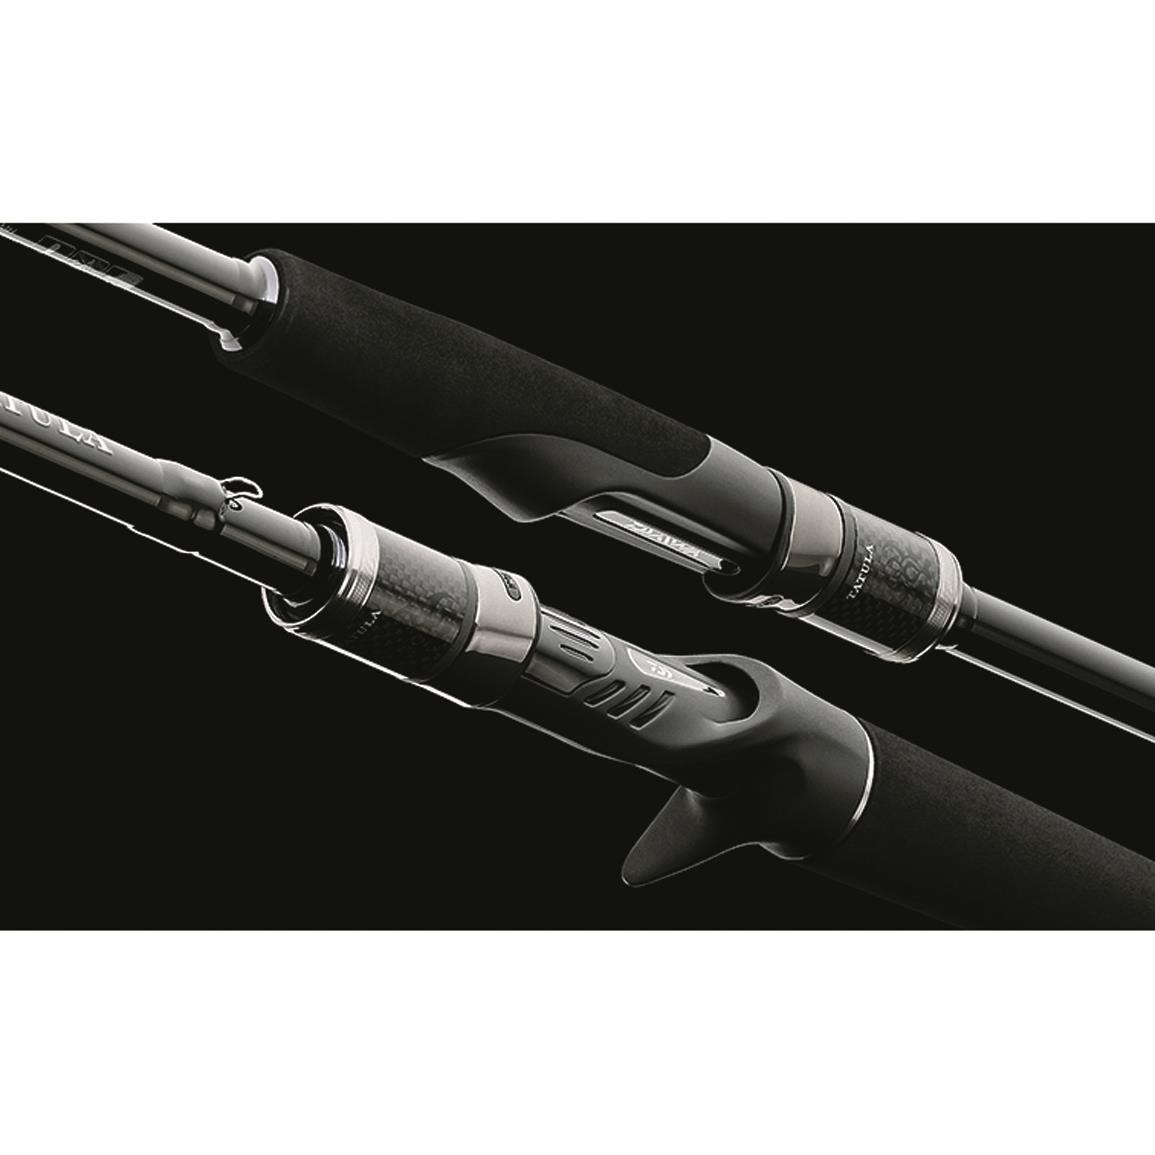 Daiwa Tatula Glass Spinnerbait Bladed Jig Casting Rod, 7'4 Length, Heavy  Power, Regular Action - 730761, Casting Rods at Sportsman's Guide